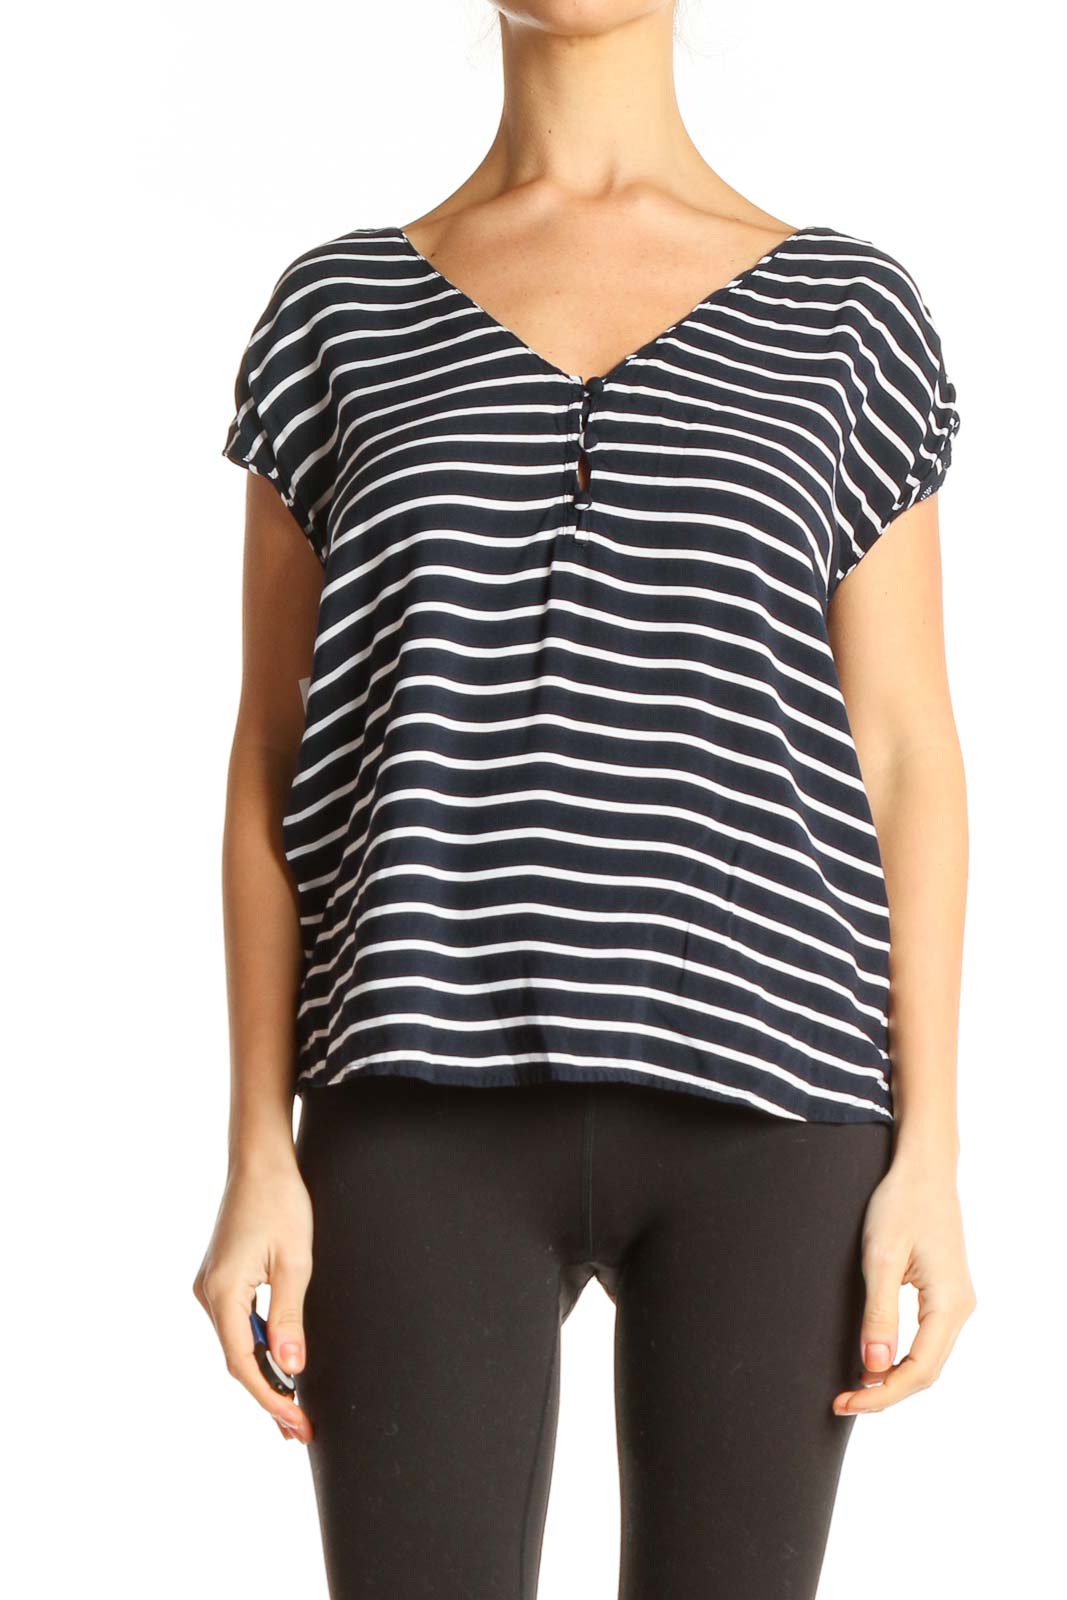 Blue Striped Casual T-Shirt Front